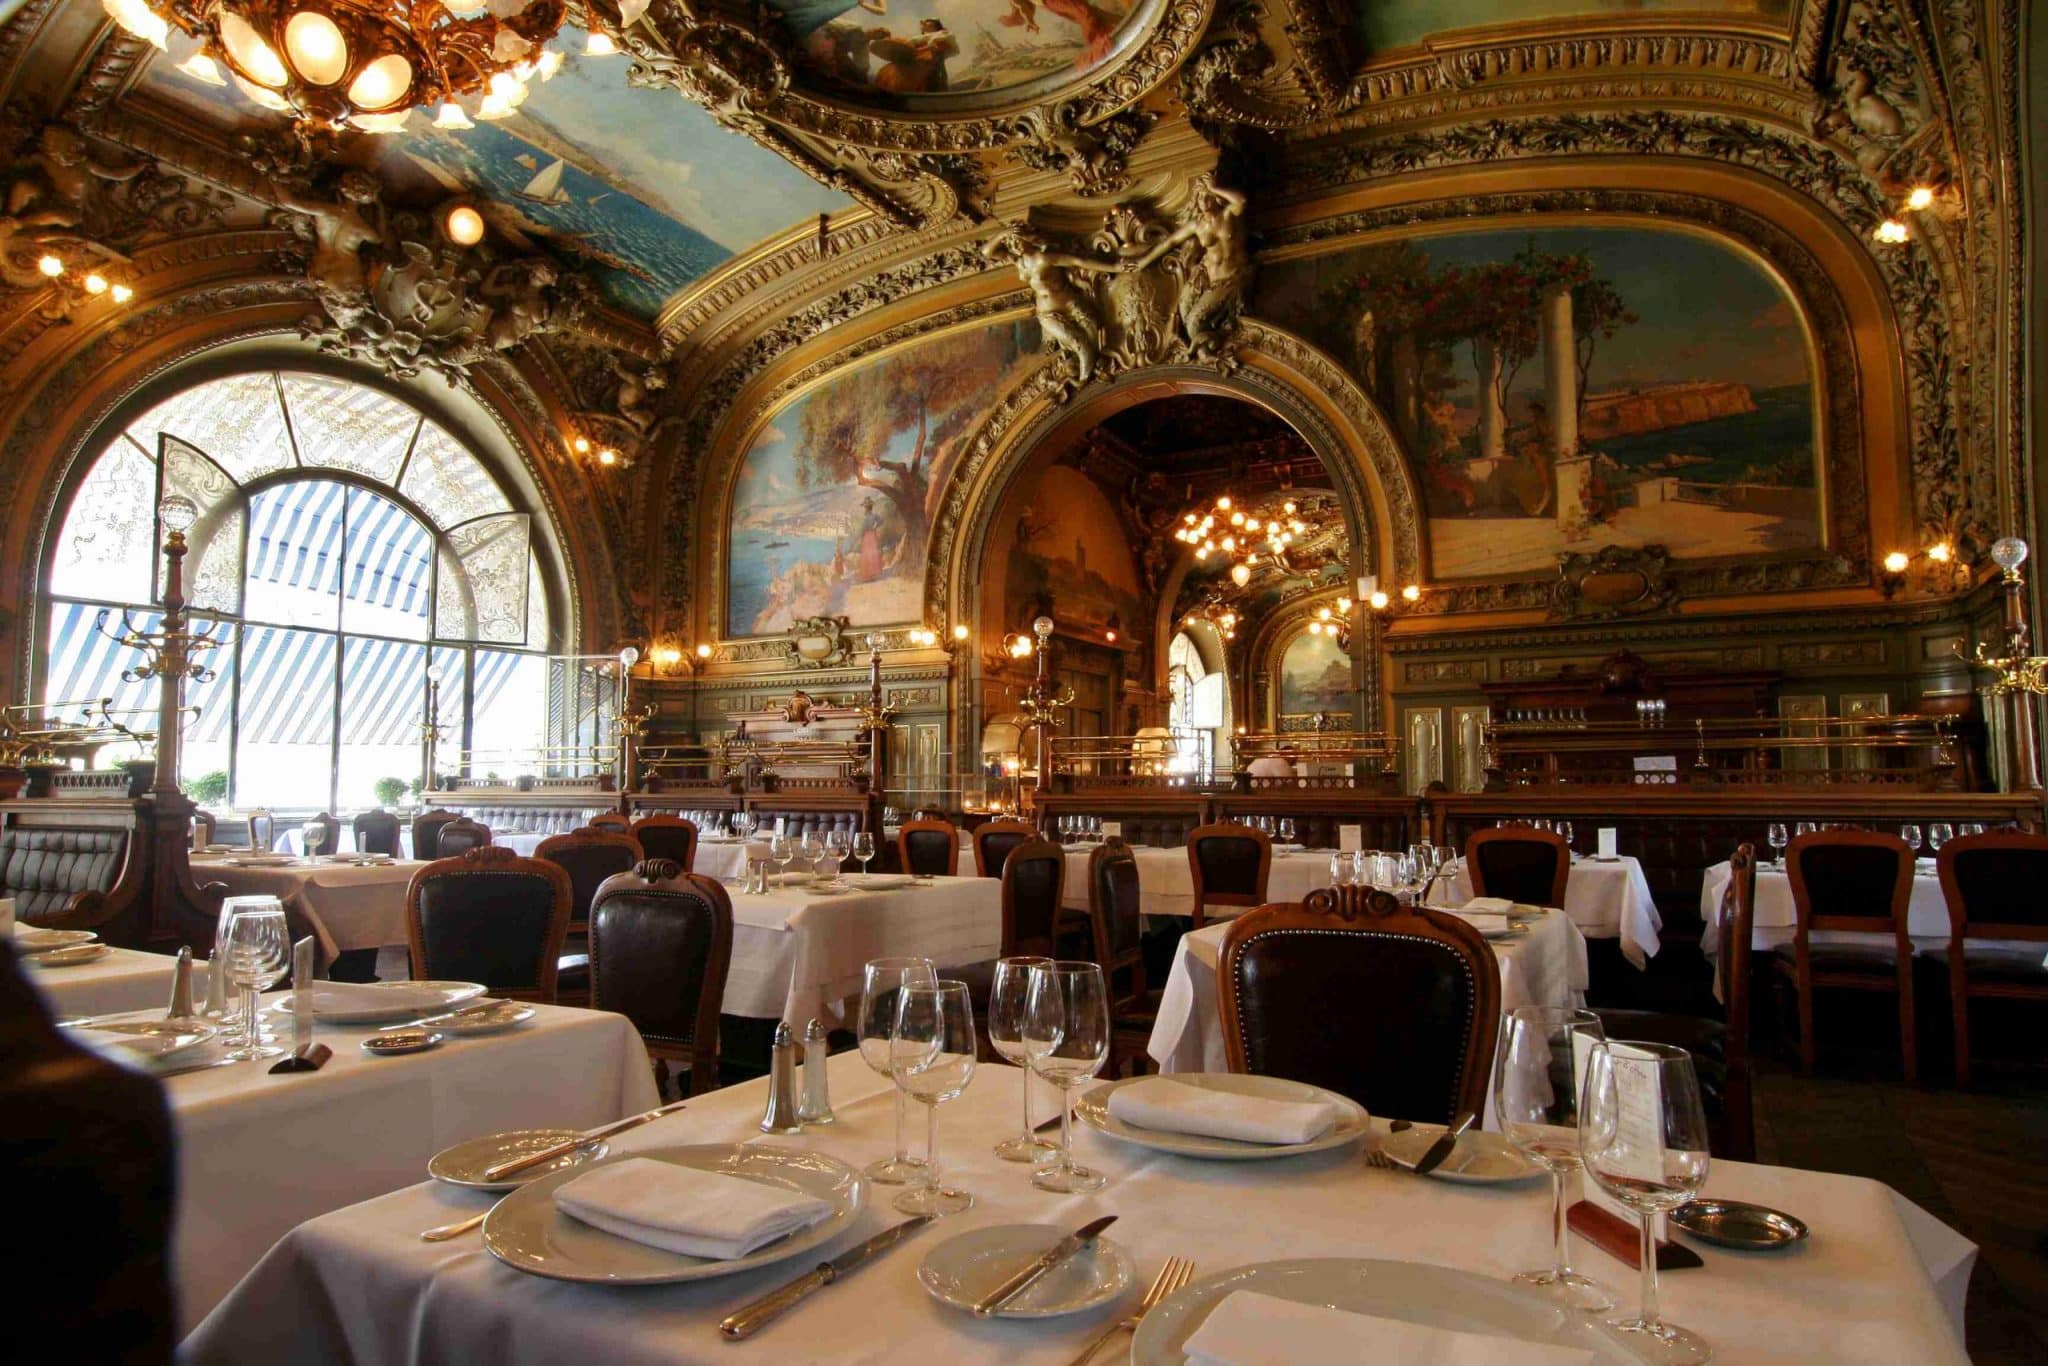 Best restaurants in Paris - a tremendous choice in the City of Lights